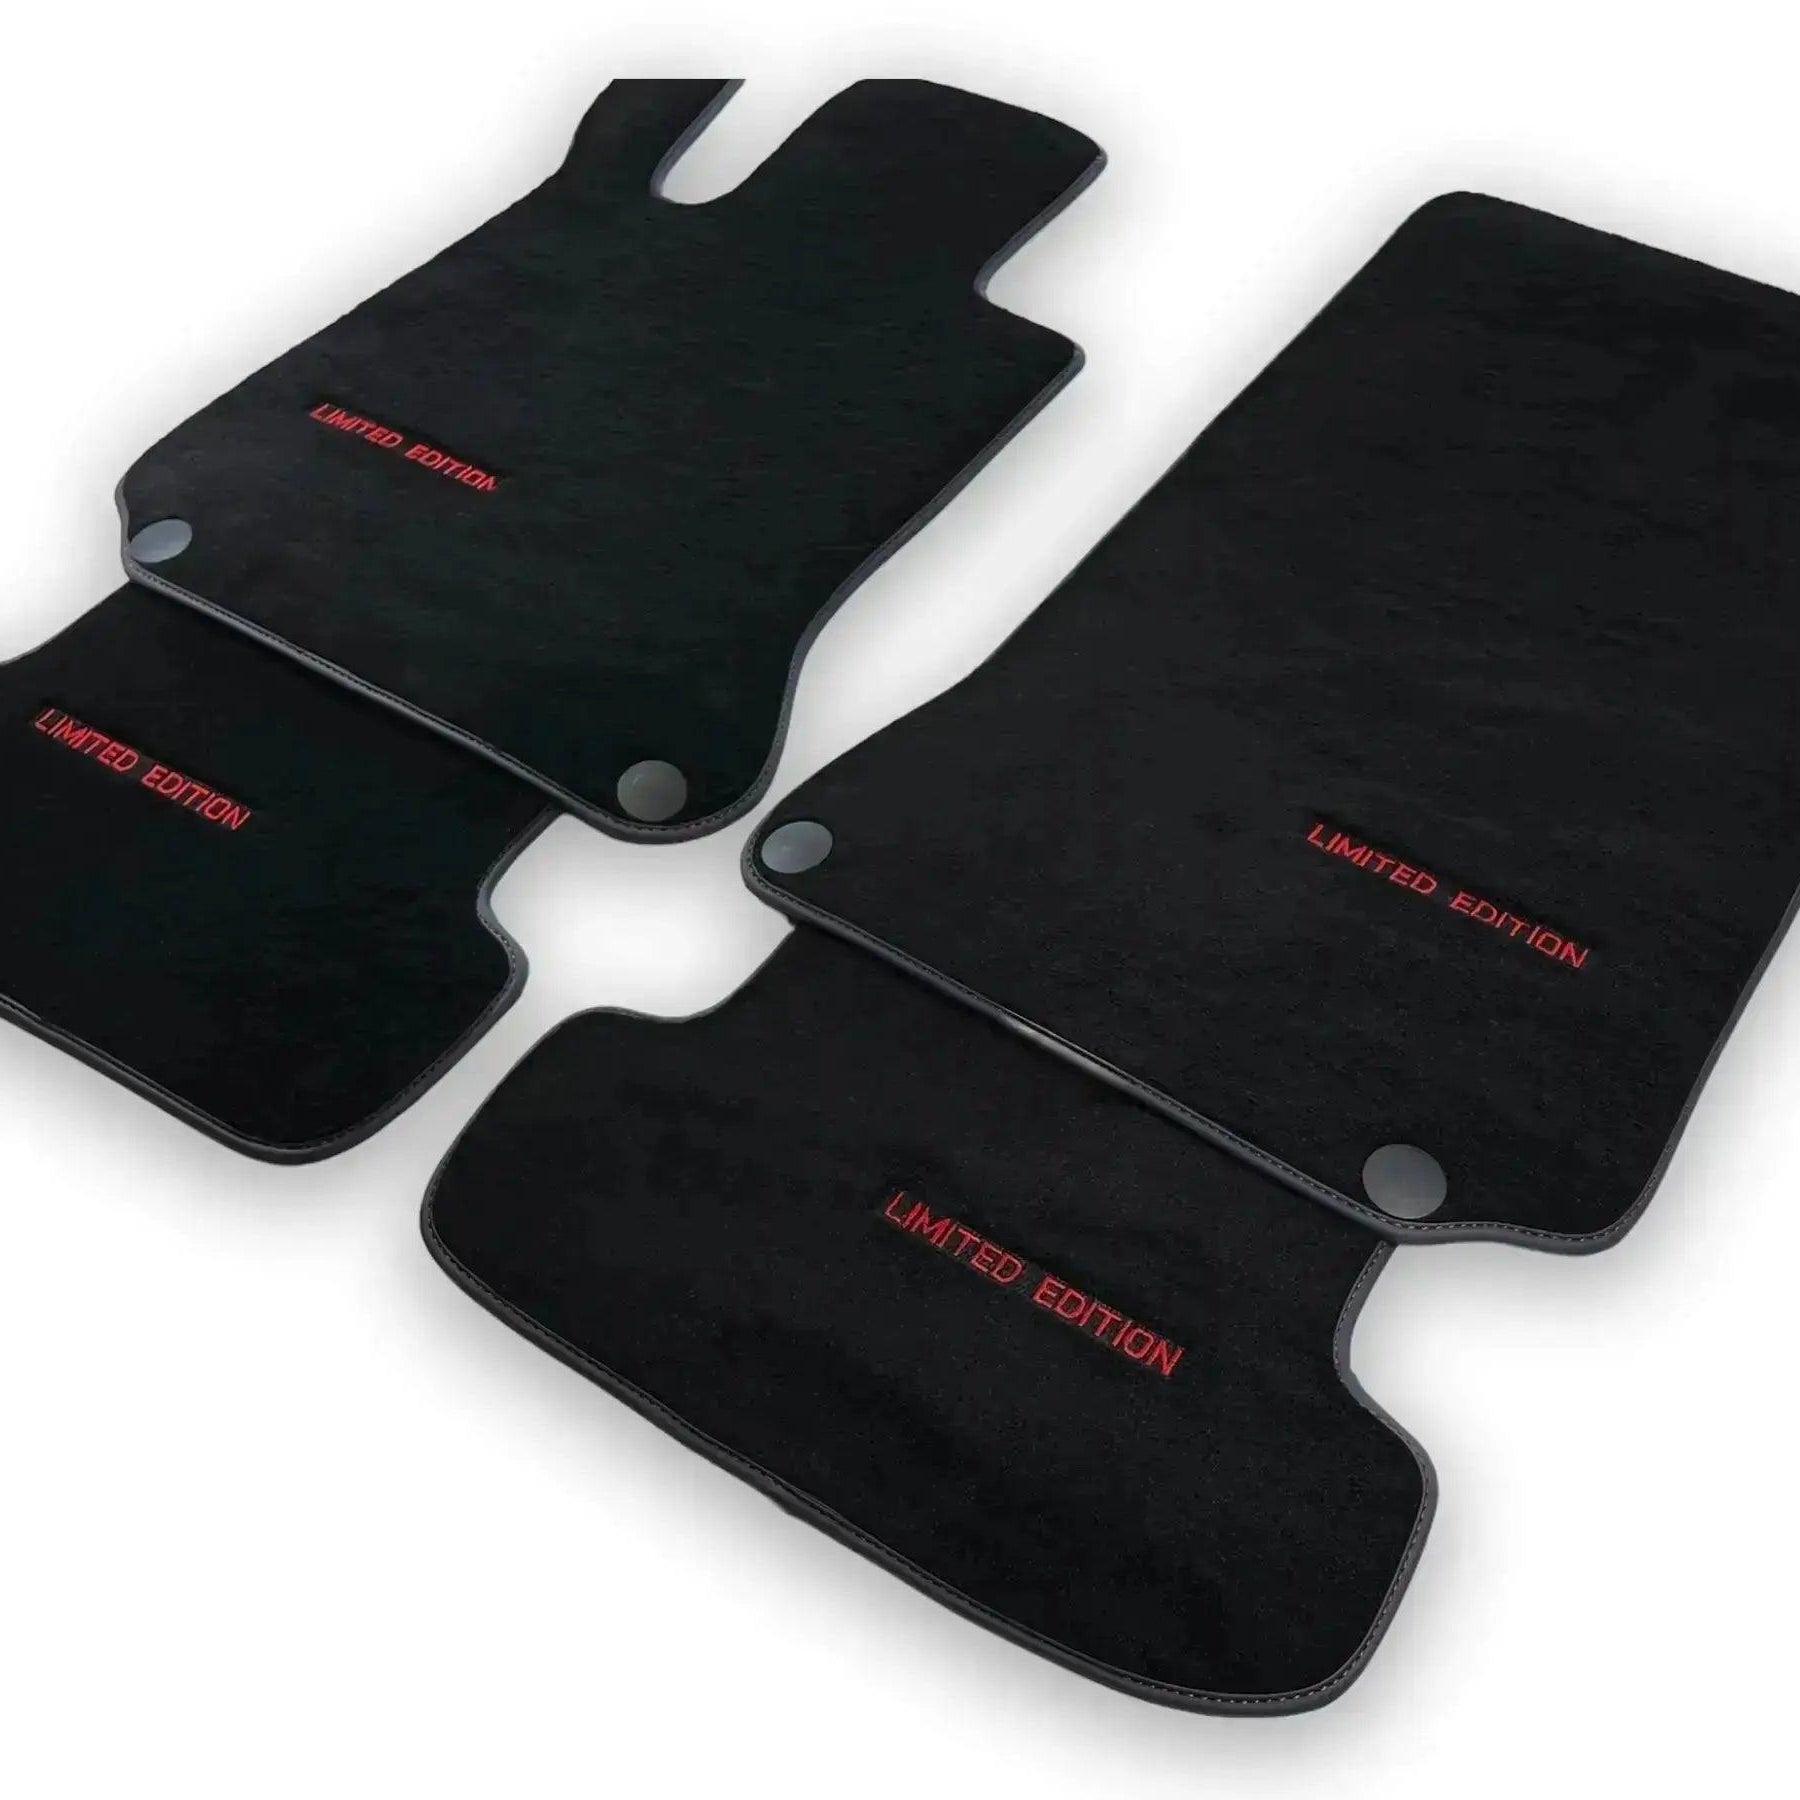 Black Floor Mats For Mercedes Benz S-Class W126 (1979-1991) | Limited Edition